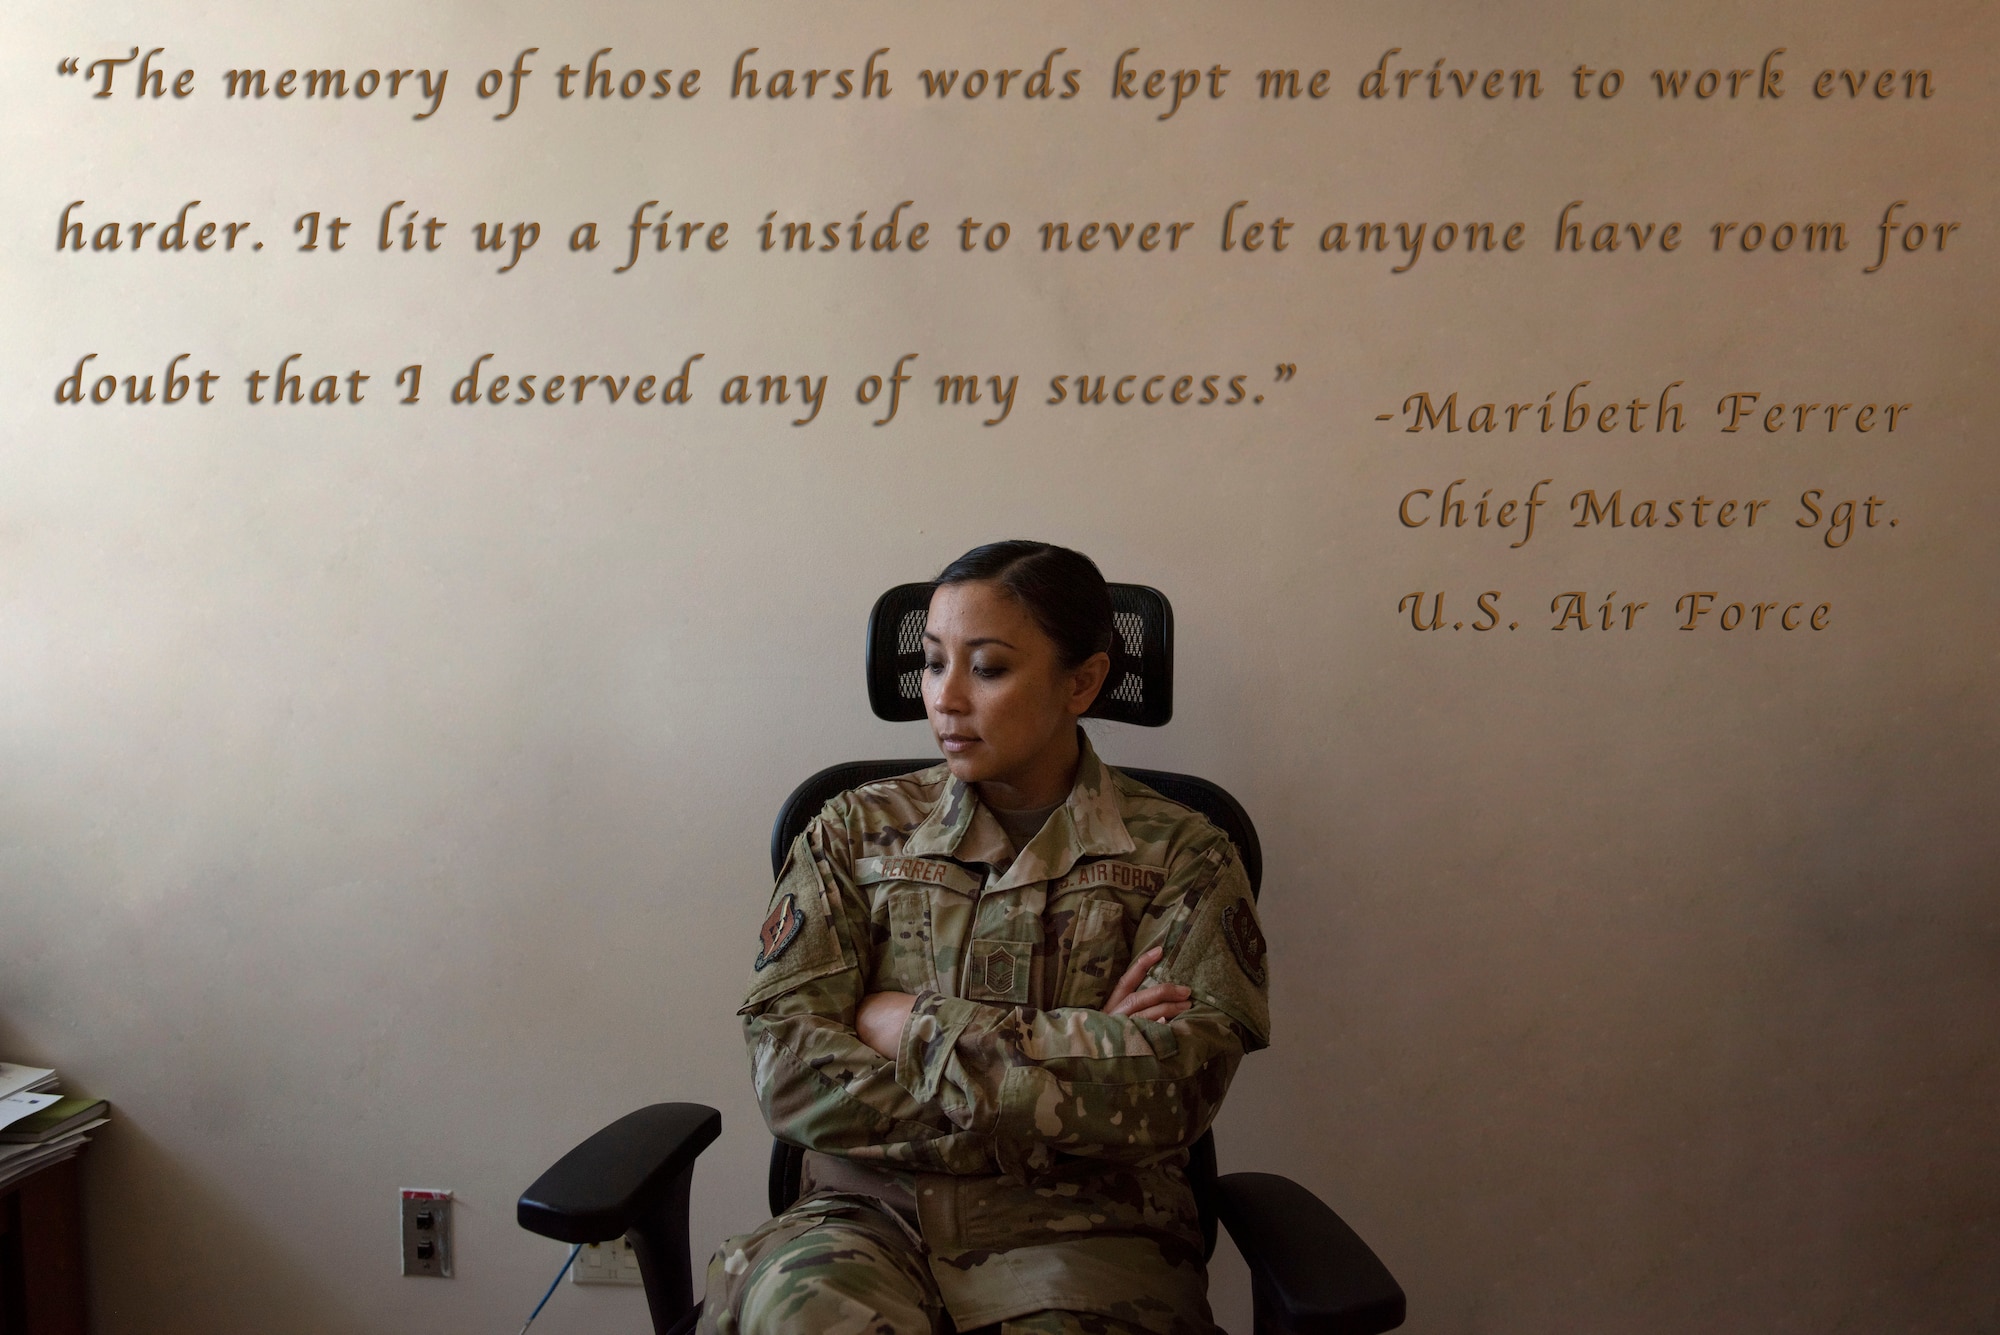 U.S. Air Force Chief Master Sgt. Maribeth Ferrer, 39th Medical Group Superintendent, poses for a photo in her office June 22, 2020, at Incirlik Air Base, Turkey. Ferrer faced discrimination as a woman of color in the early stages of her Air Force career, and now fights to create a culture where all Airmen feel safe and welcome. (U.S. Air Force illustration by Staff Sgt. Joshua Magbanua)